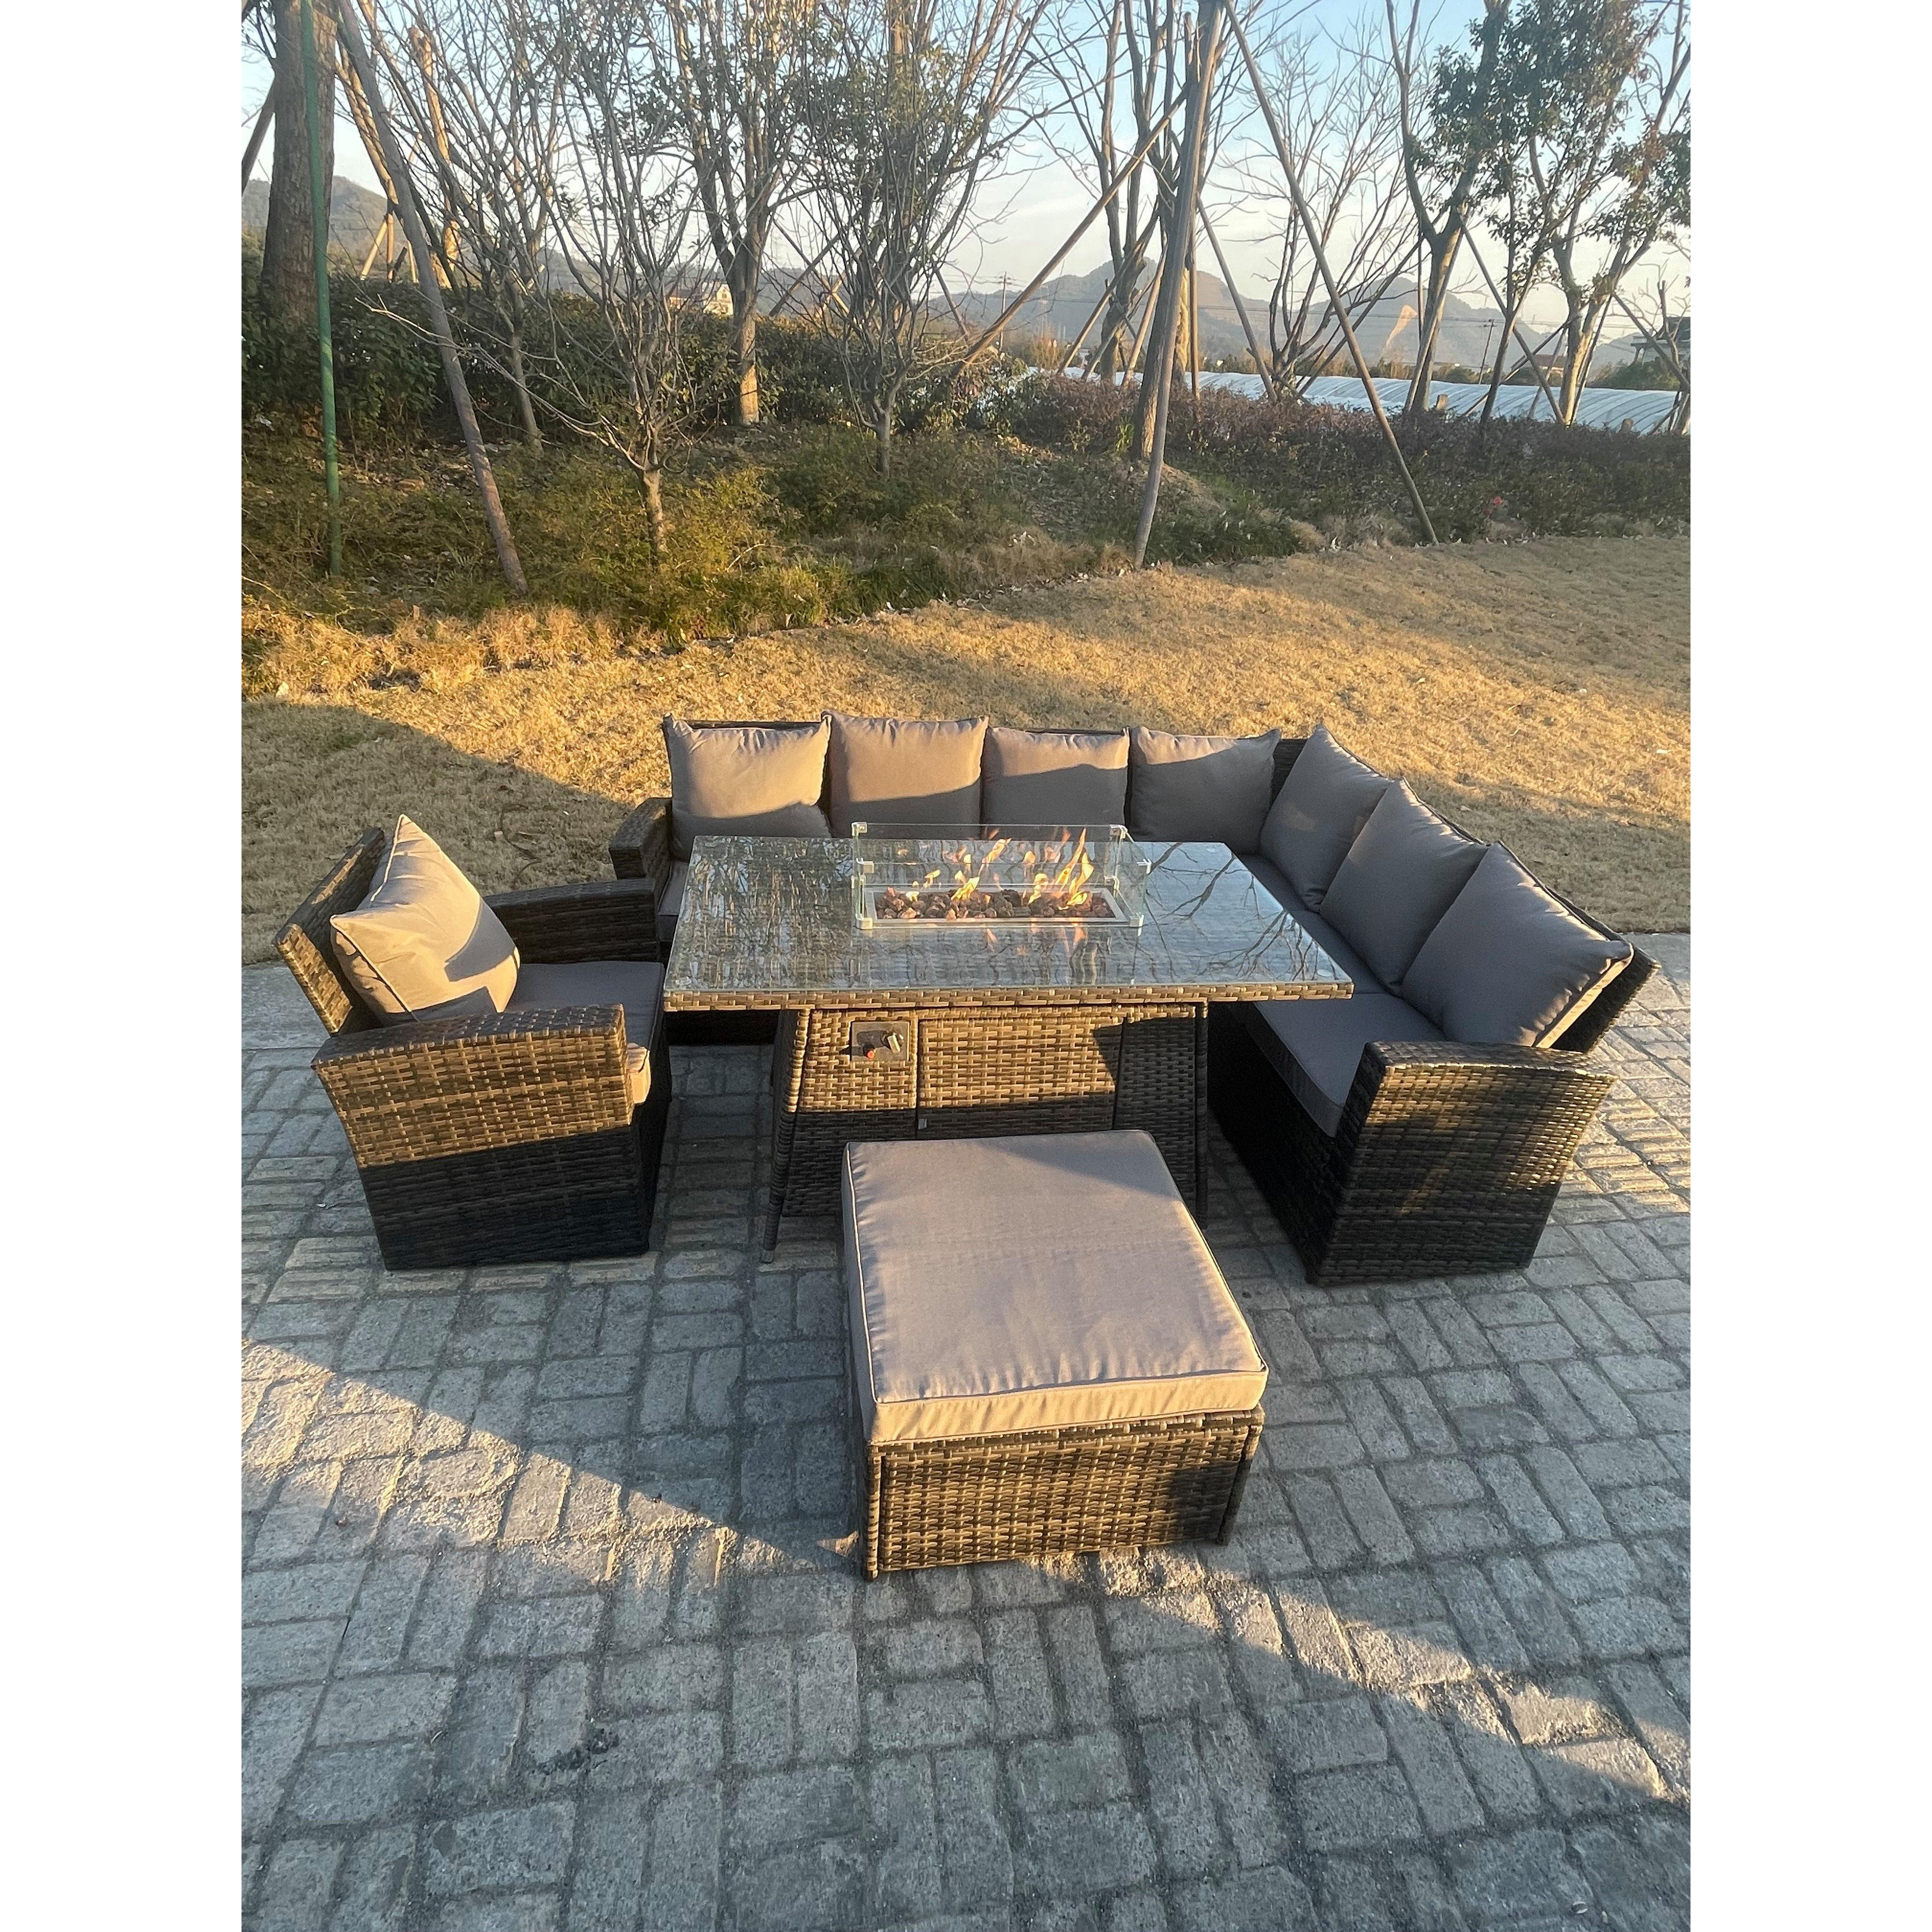 High Back Rattan Garden Furniture Sets Gas Fire Pit Dining Table  Right Corner Sofa Big Footstools Chair 8 Seater - image 1